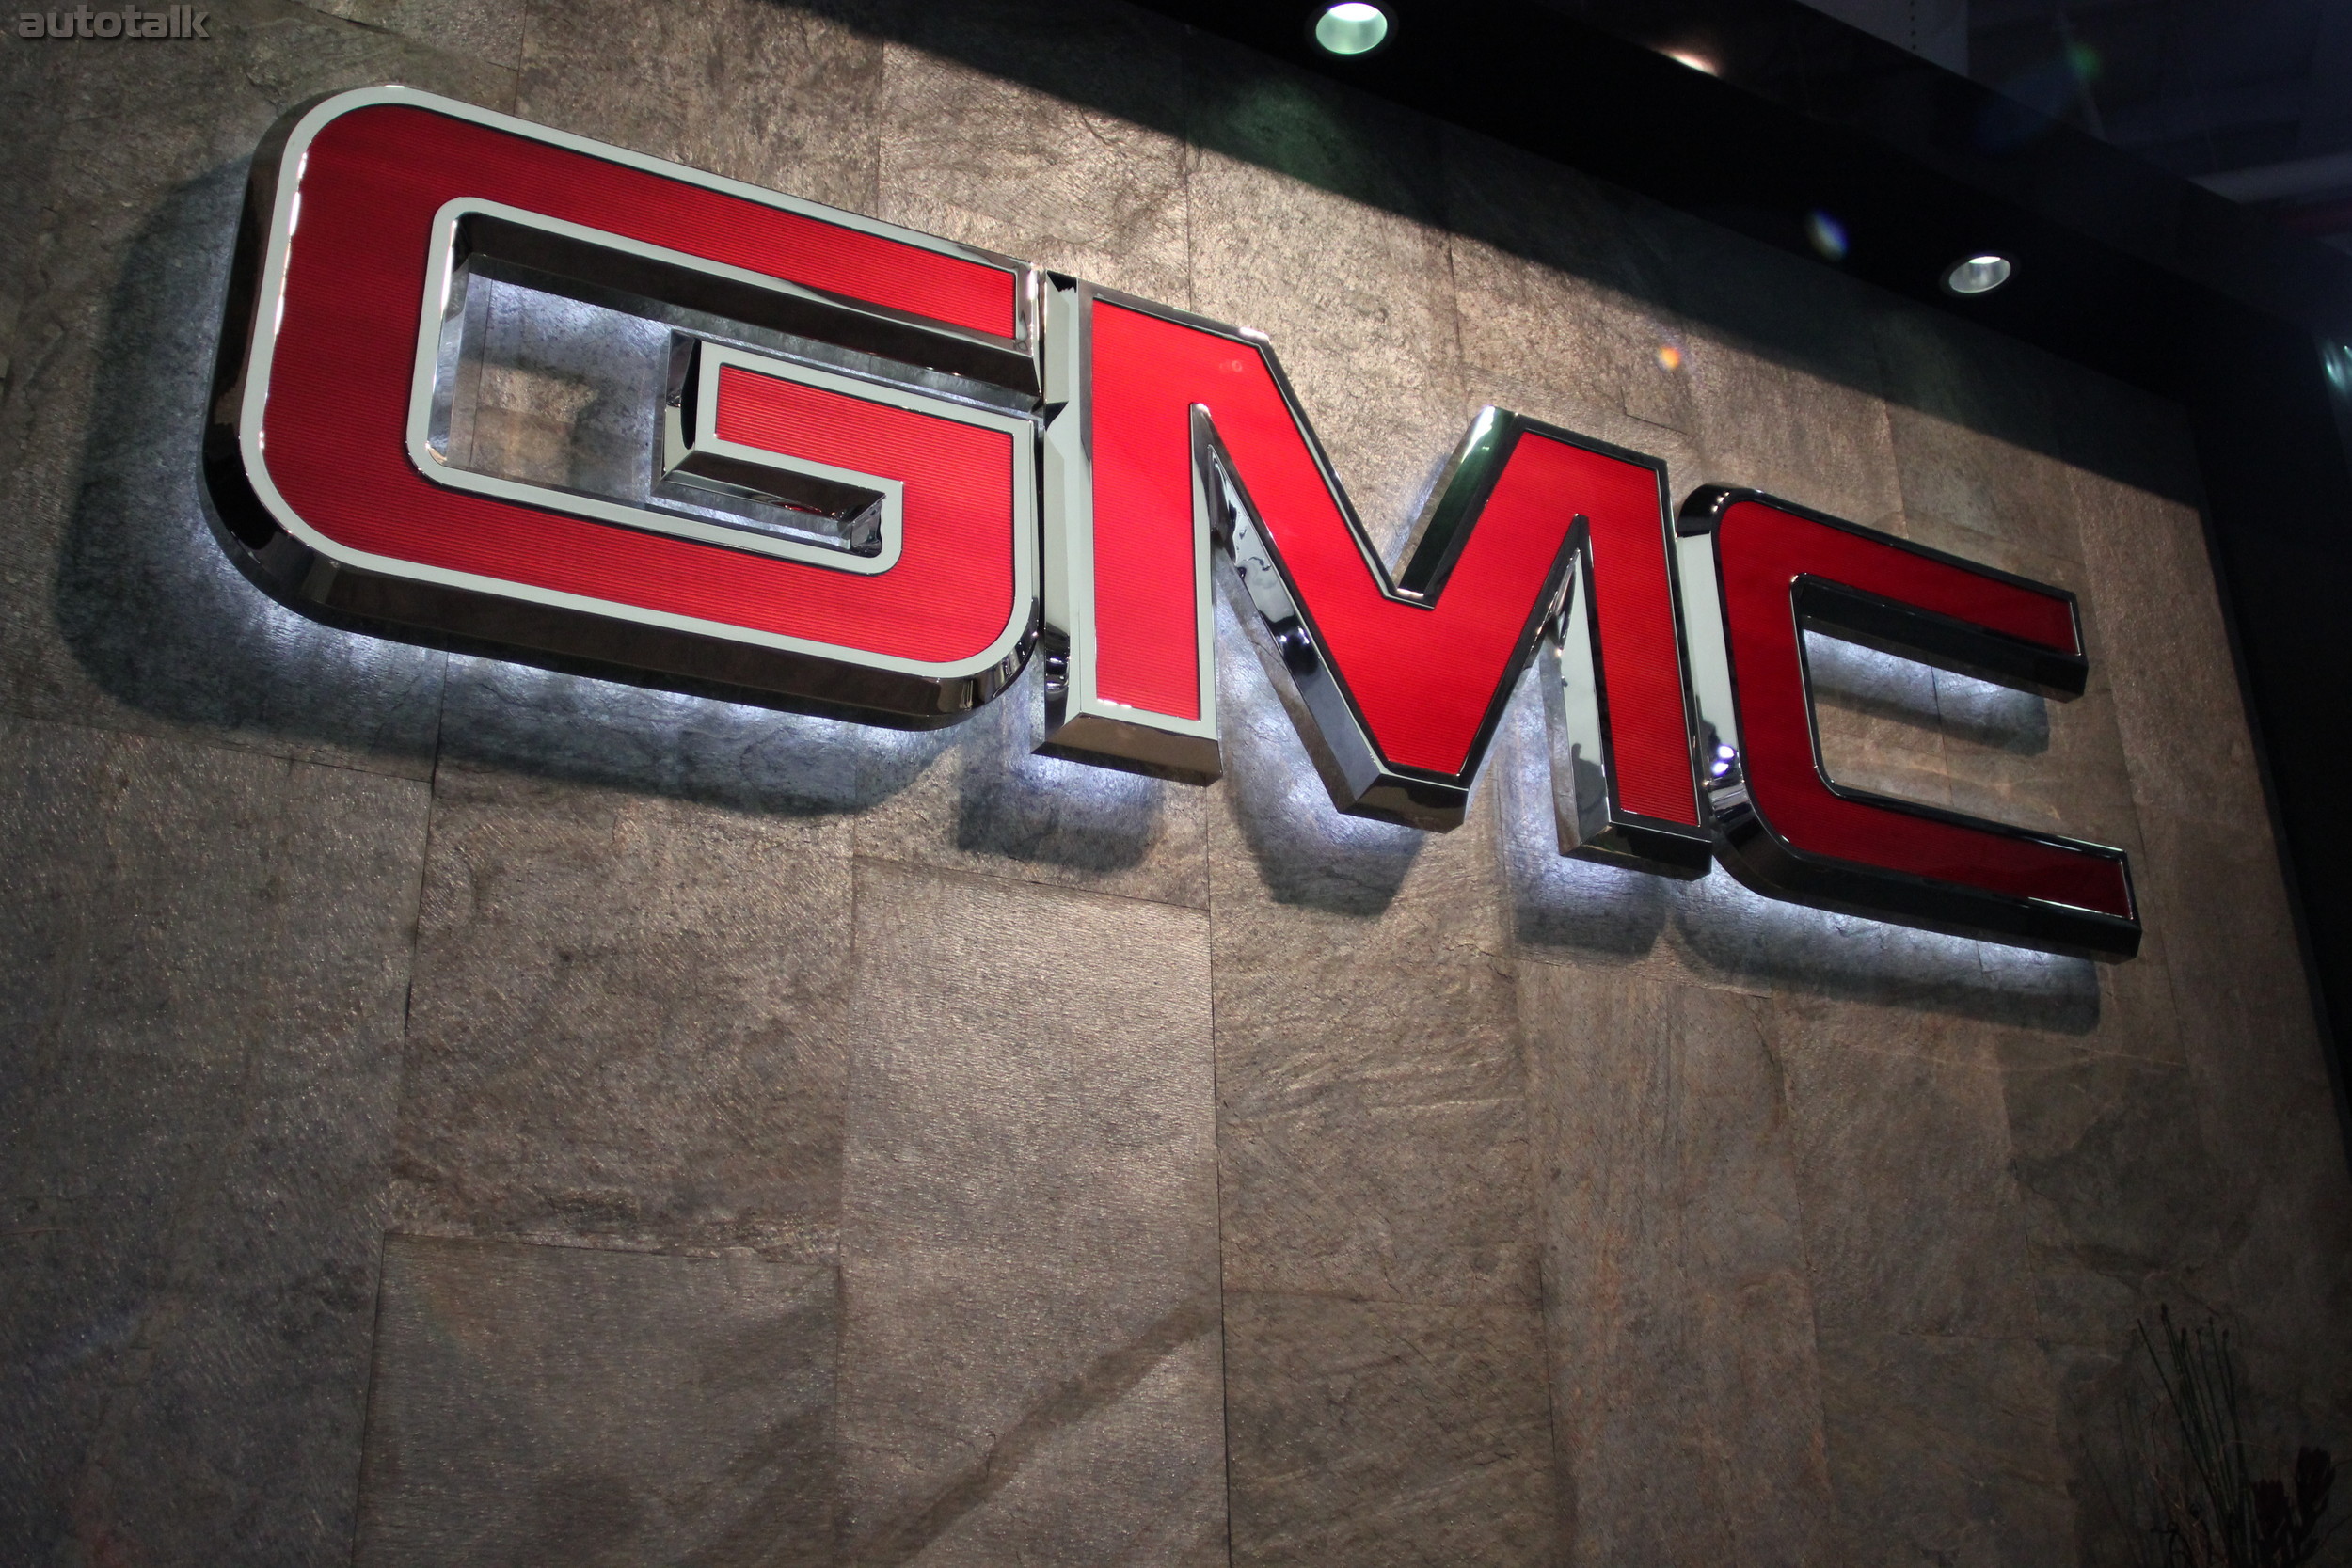 GMC Booth NYIAS 2012